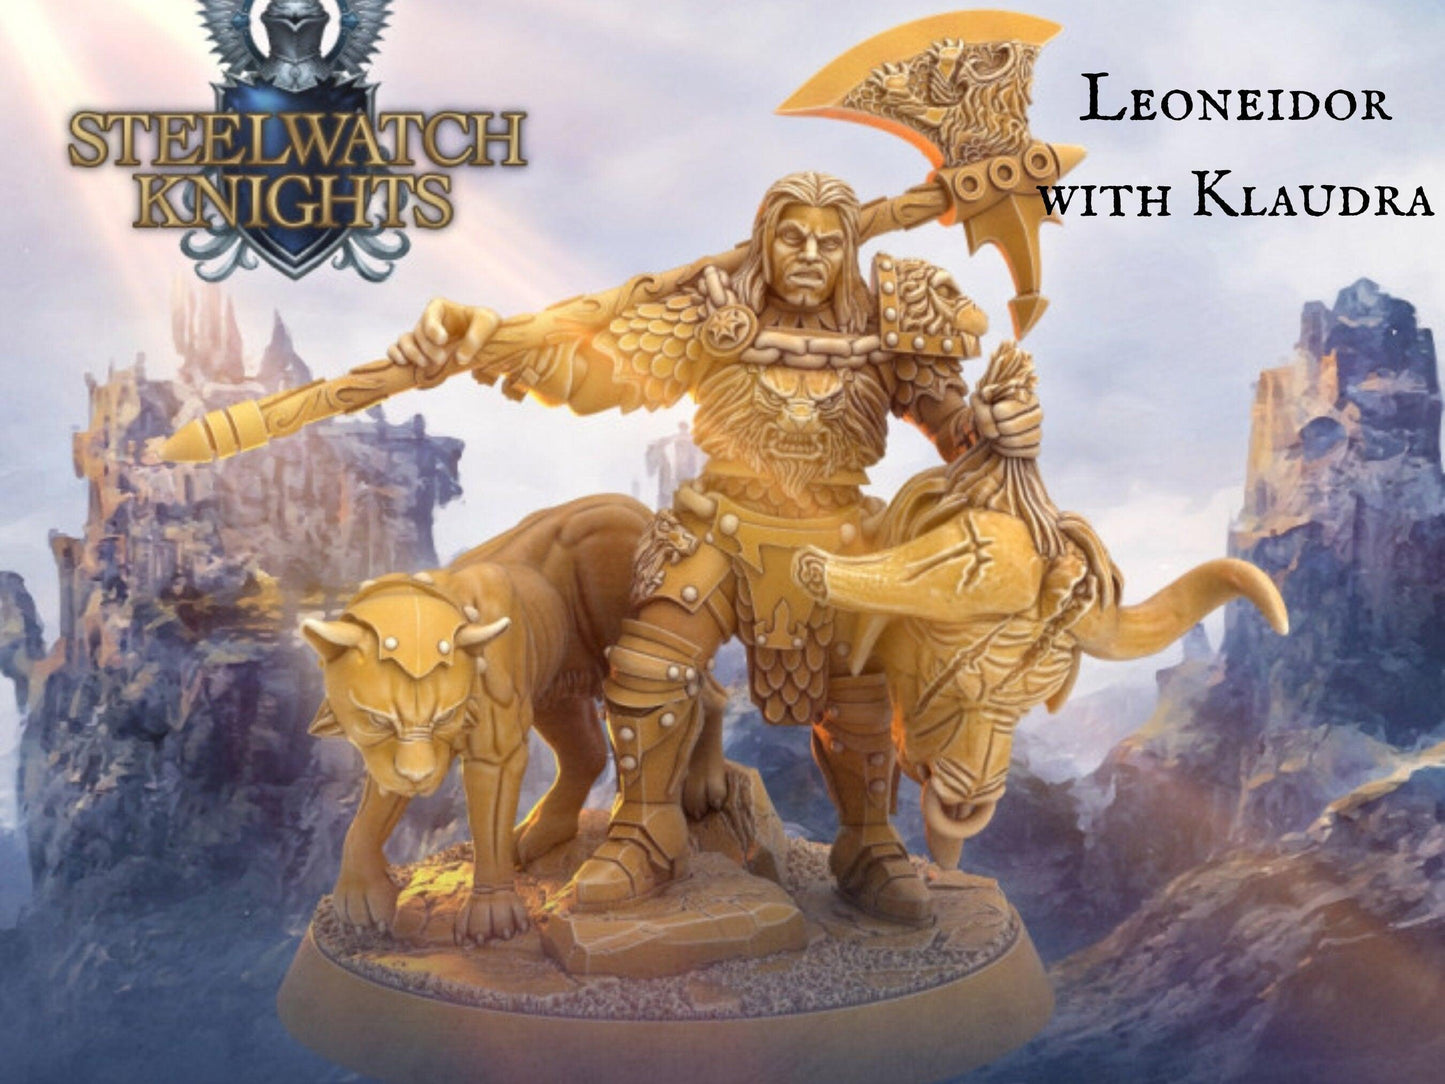 Klaudra the Lion miniature | Dragon's Forge | 28mm Scale | DnD Miniature | Dungeons and Dragons | cat miniature - Plague Miniatures shop for DnD Miniatures